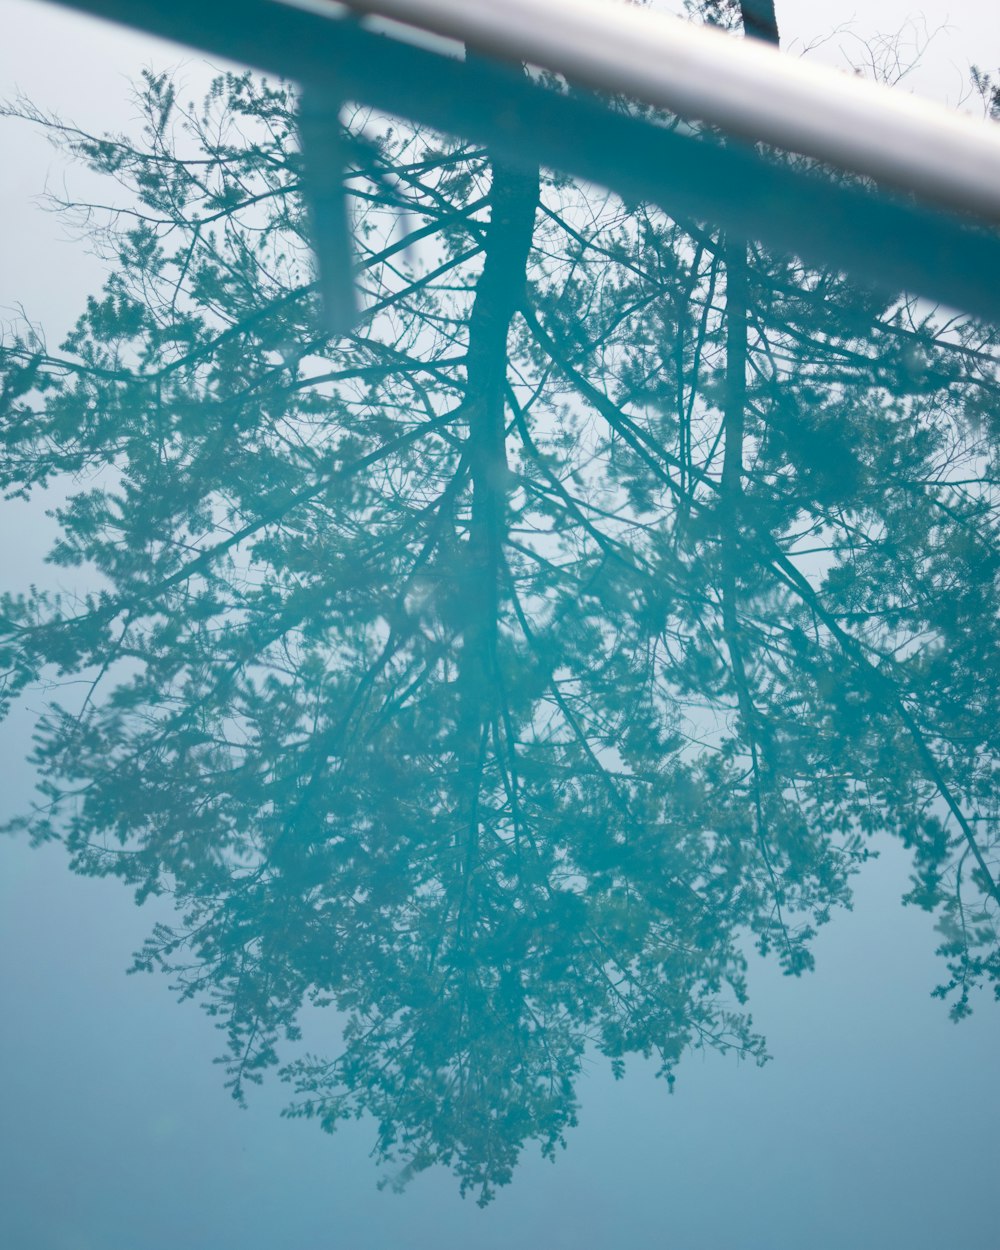 a reflection of a tree in a pool of water